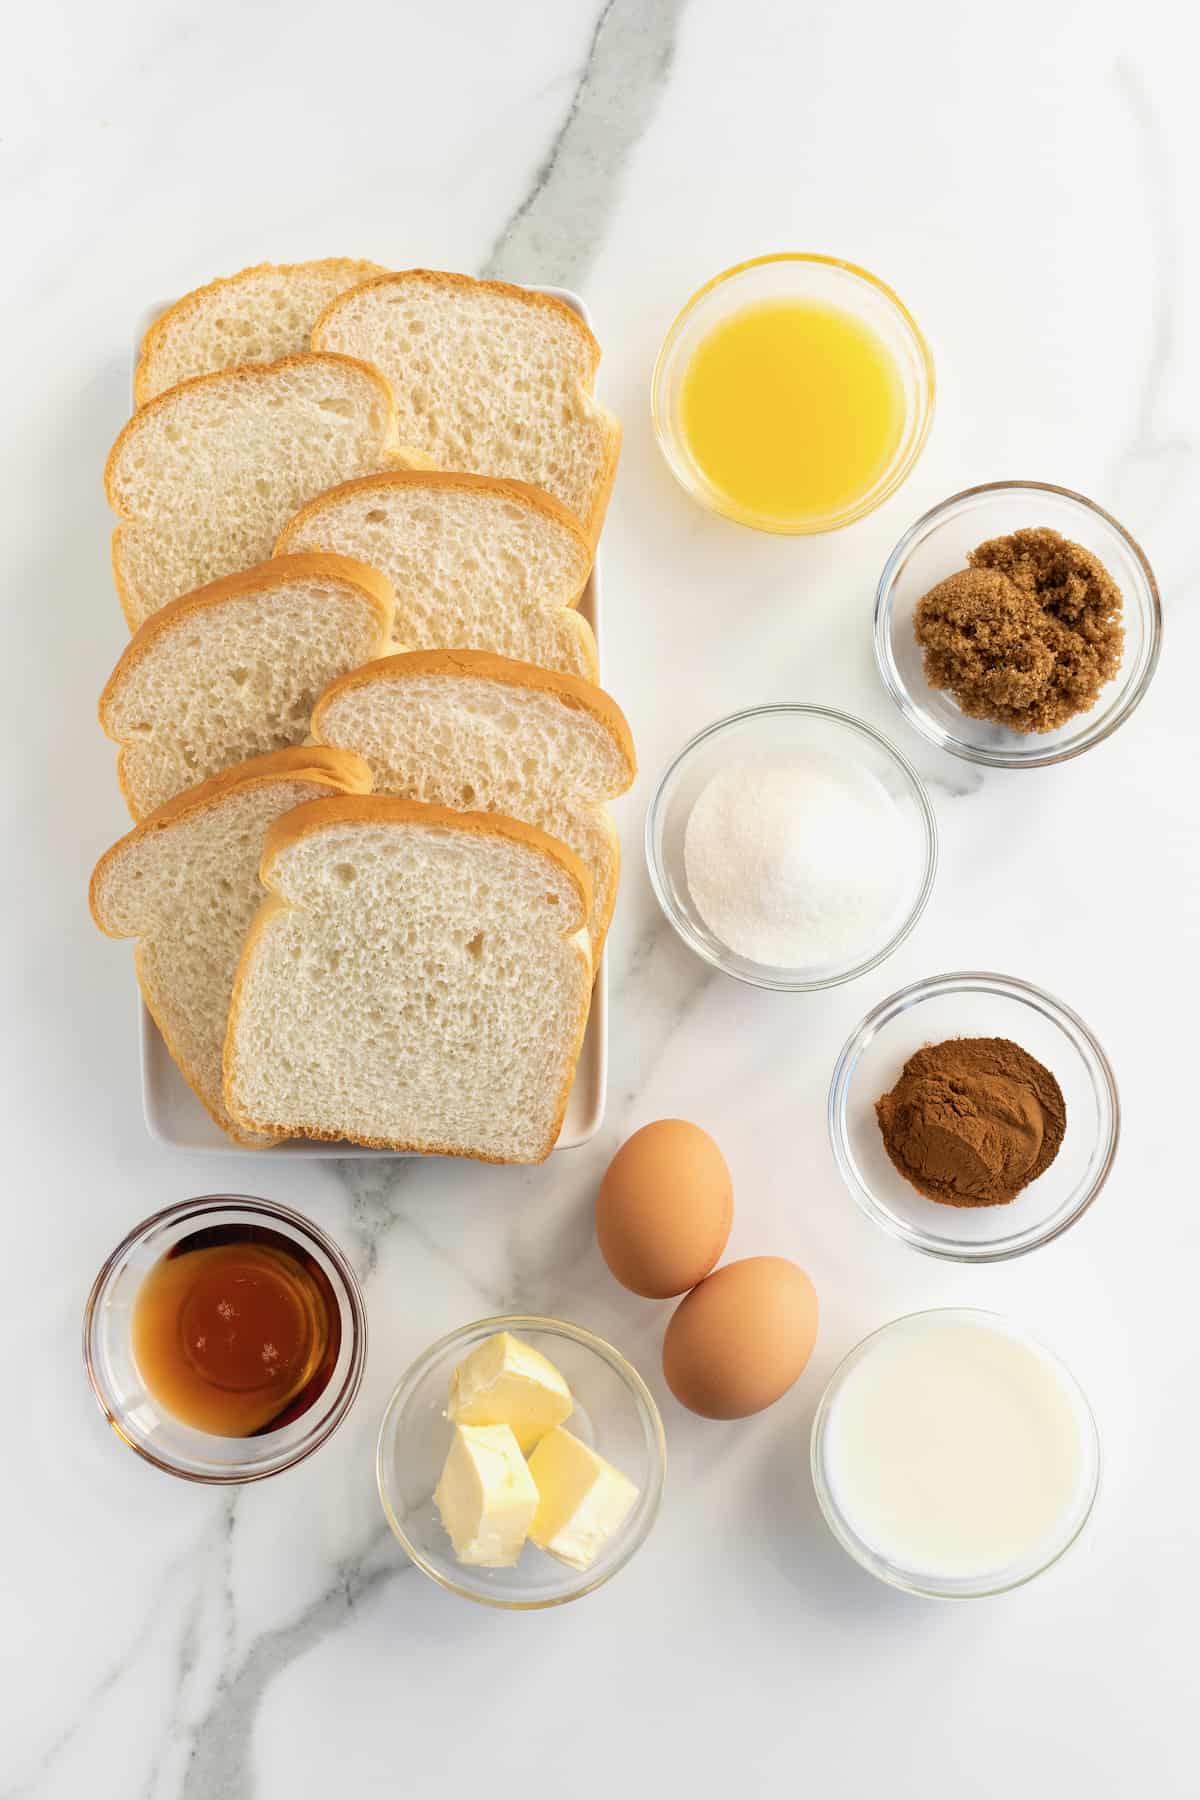 Sliced white bread on a counter next to two brown eggs and glass dishes filled with maple syrup, cinnamon, sugar, and melted butter.